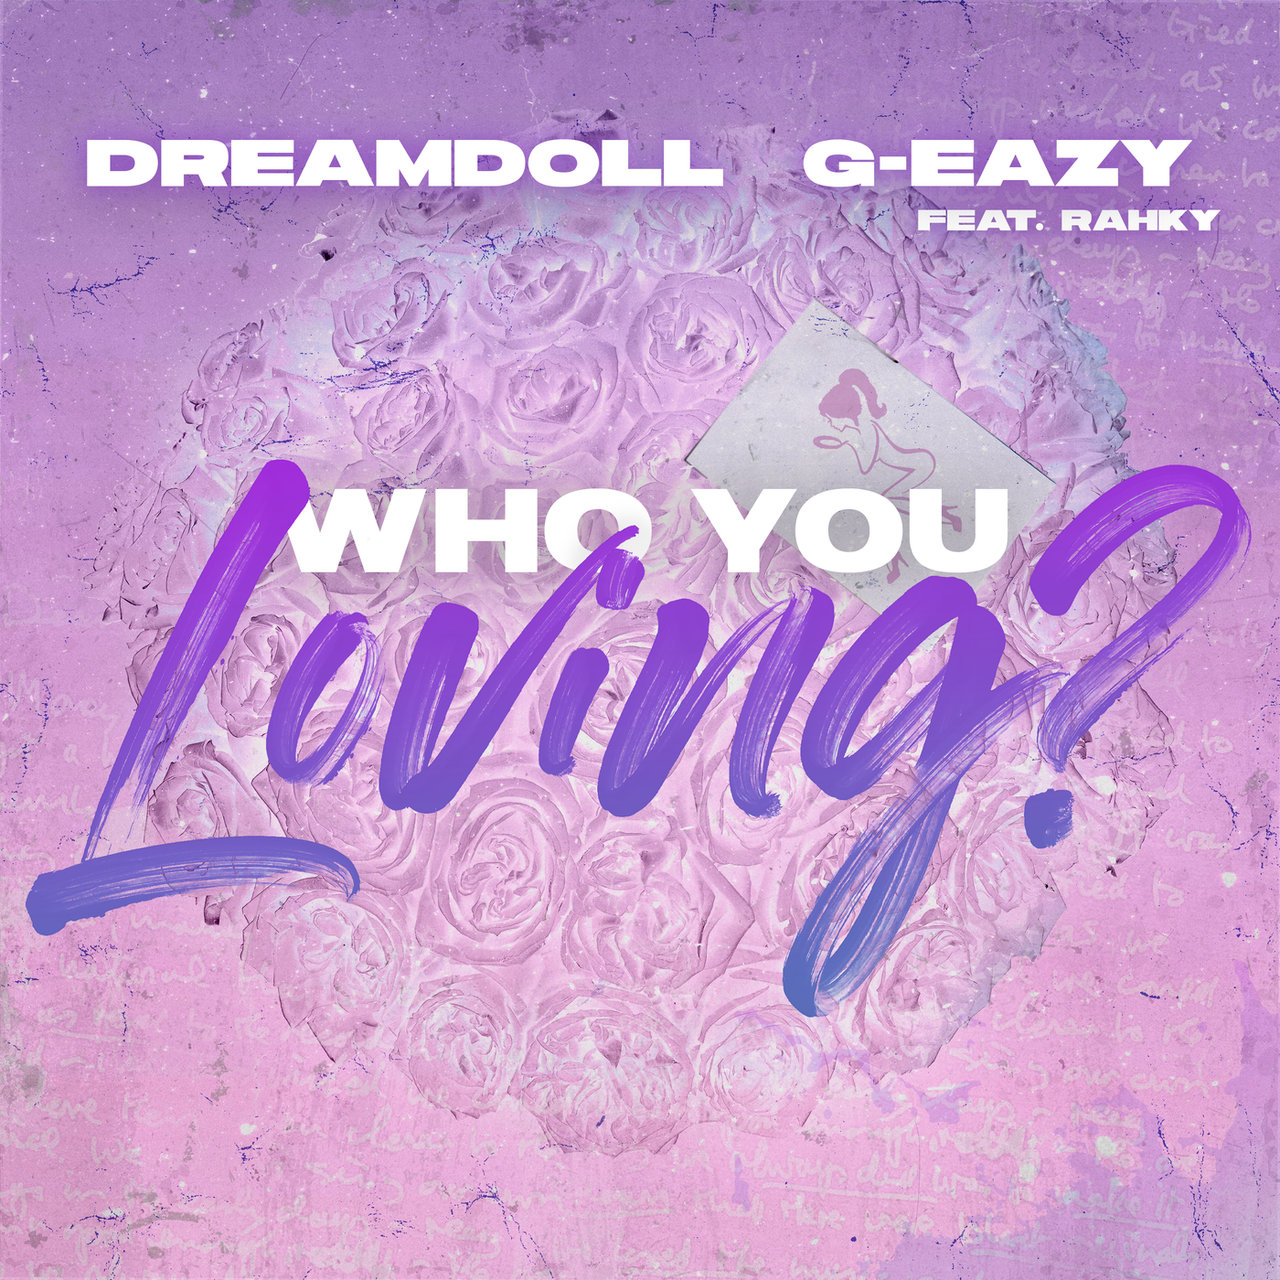 DreamDoll - Who You Loving? (ft. G-Eazy and Rahky) (Cover)